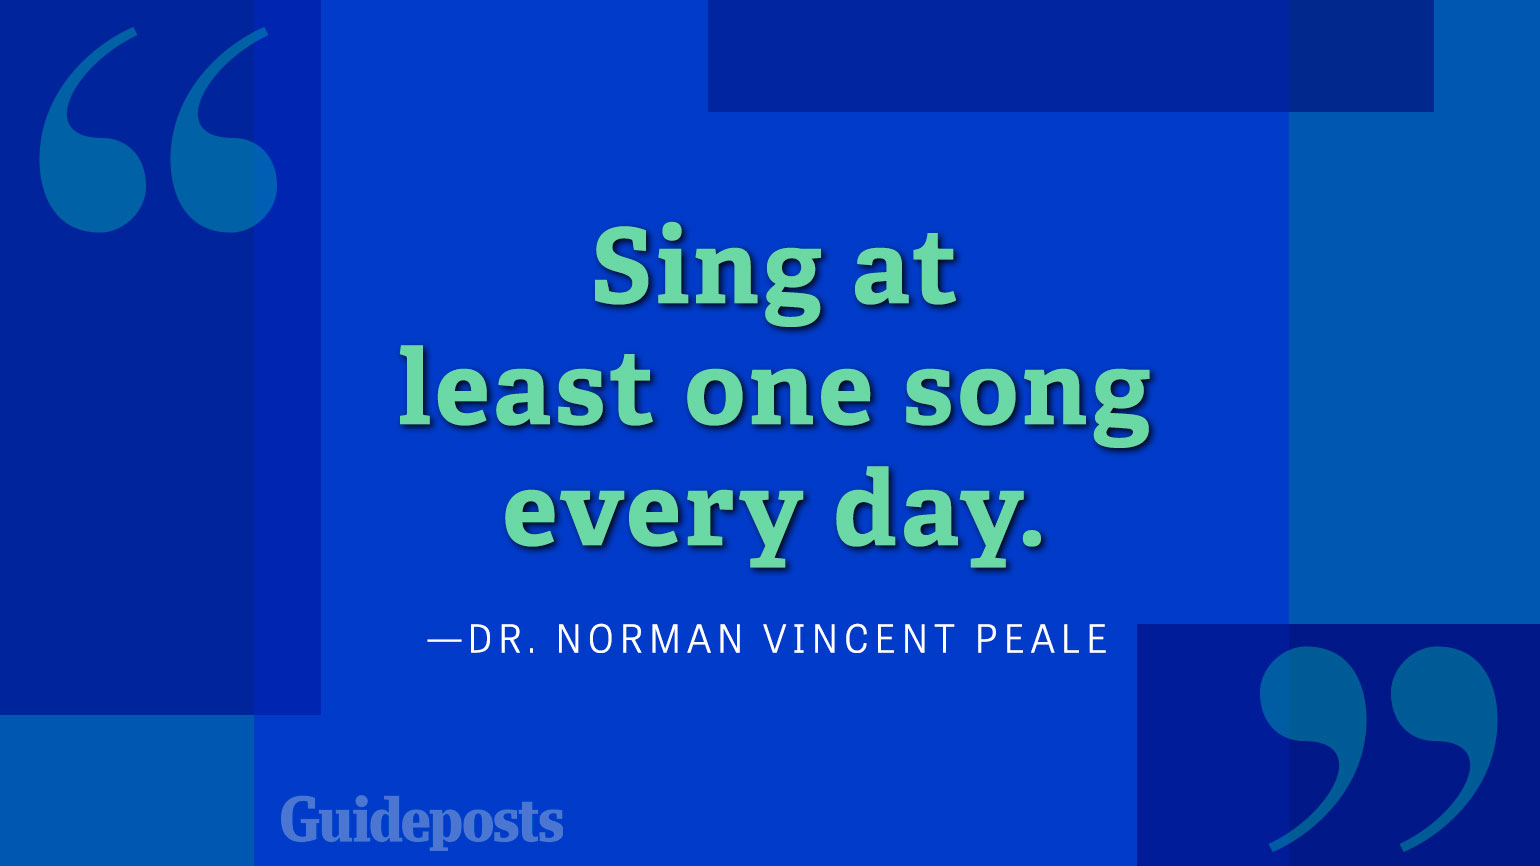 Sing at least one song every day.